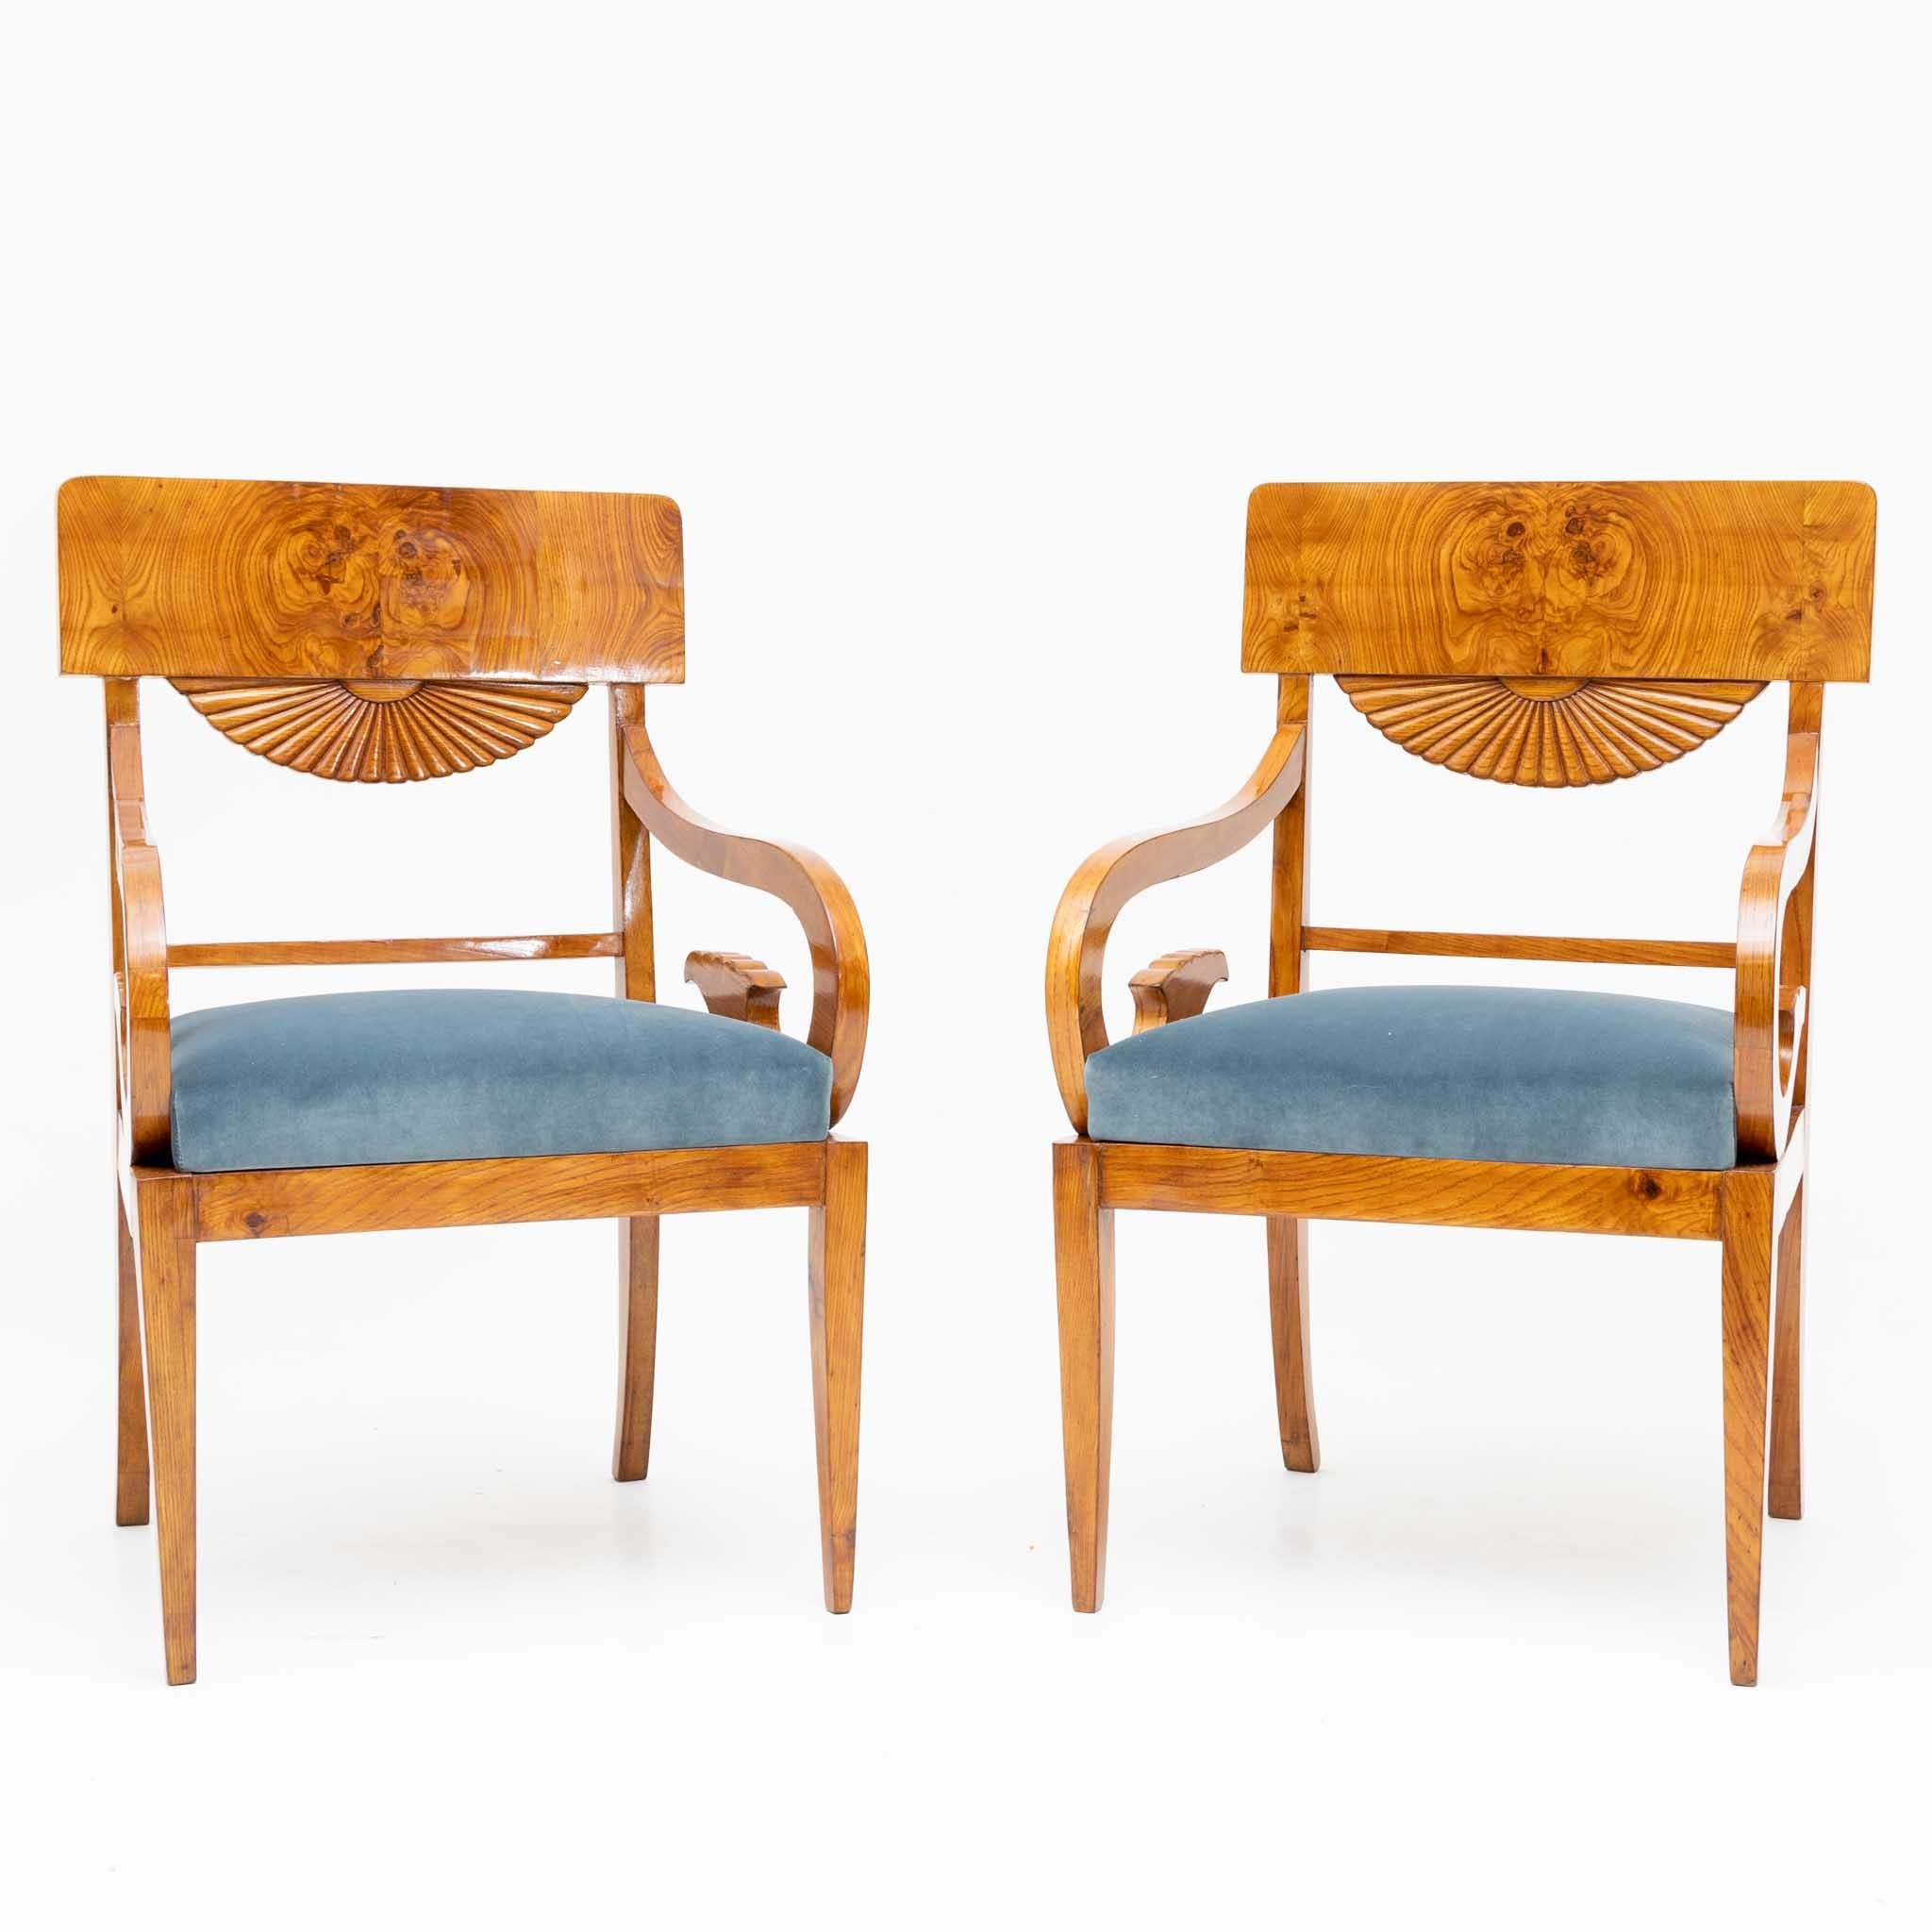 Biedermeier Armchairs with Blue Upholstery, Baltic States Around 1830 For Sale 2